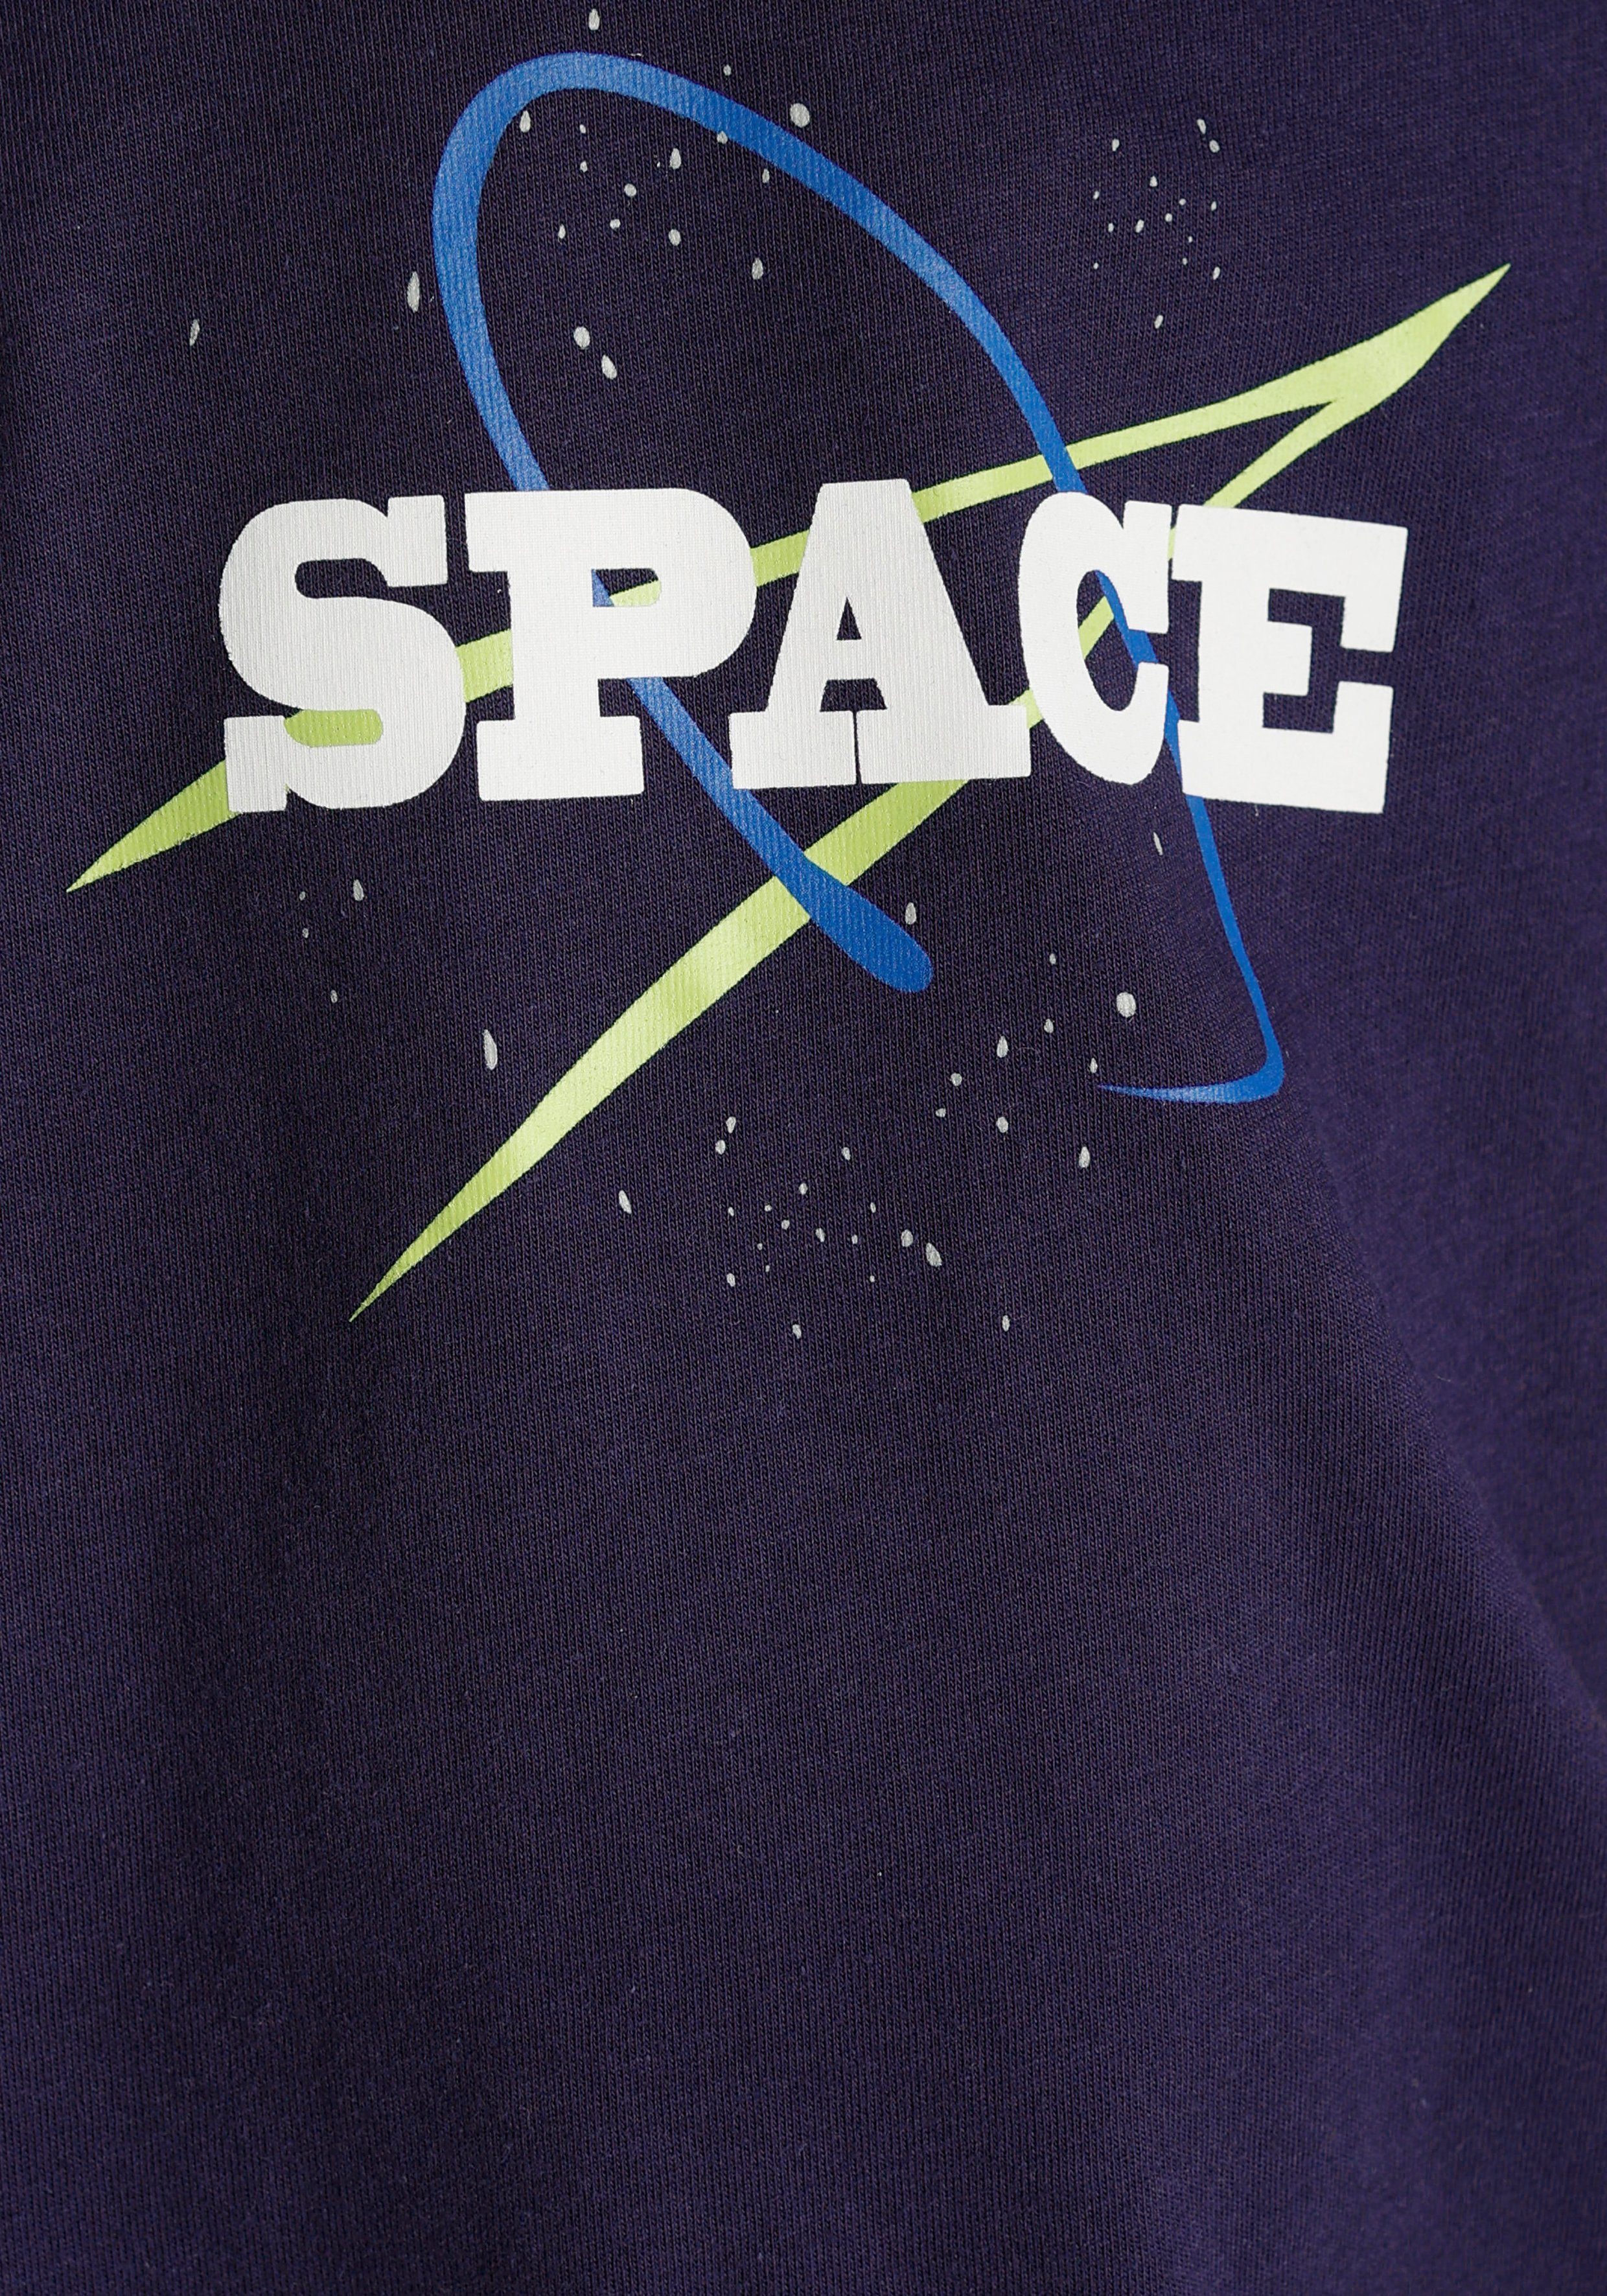 Scout T-Shirt SPACE Bio-Baumwolle aus (Packung, 2er-Pack)